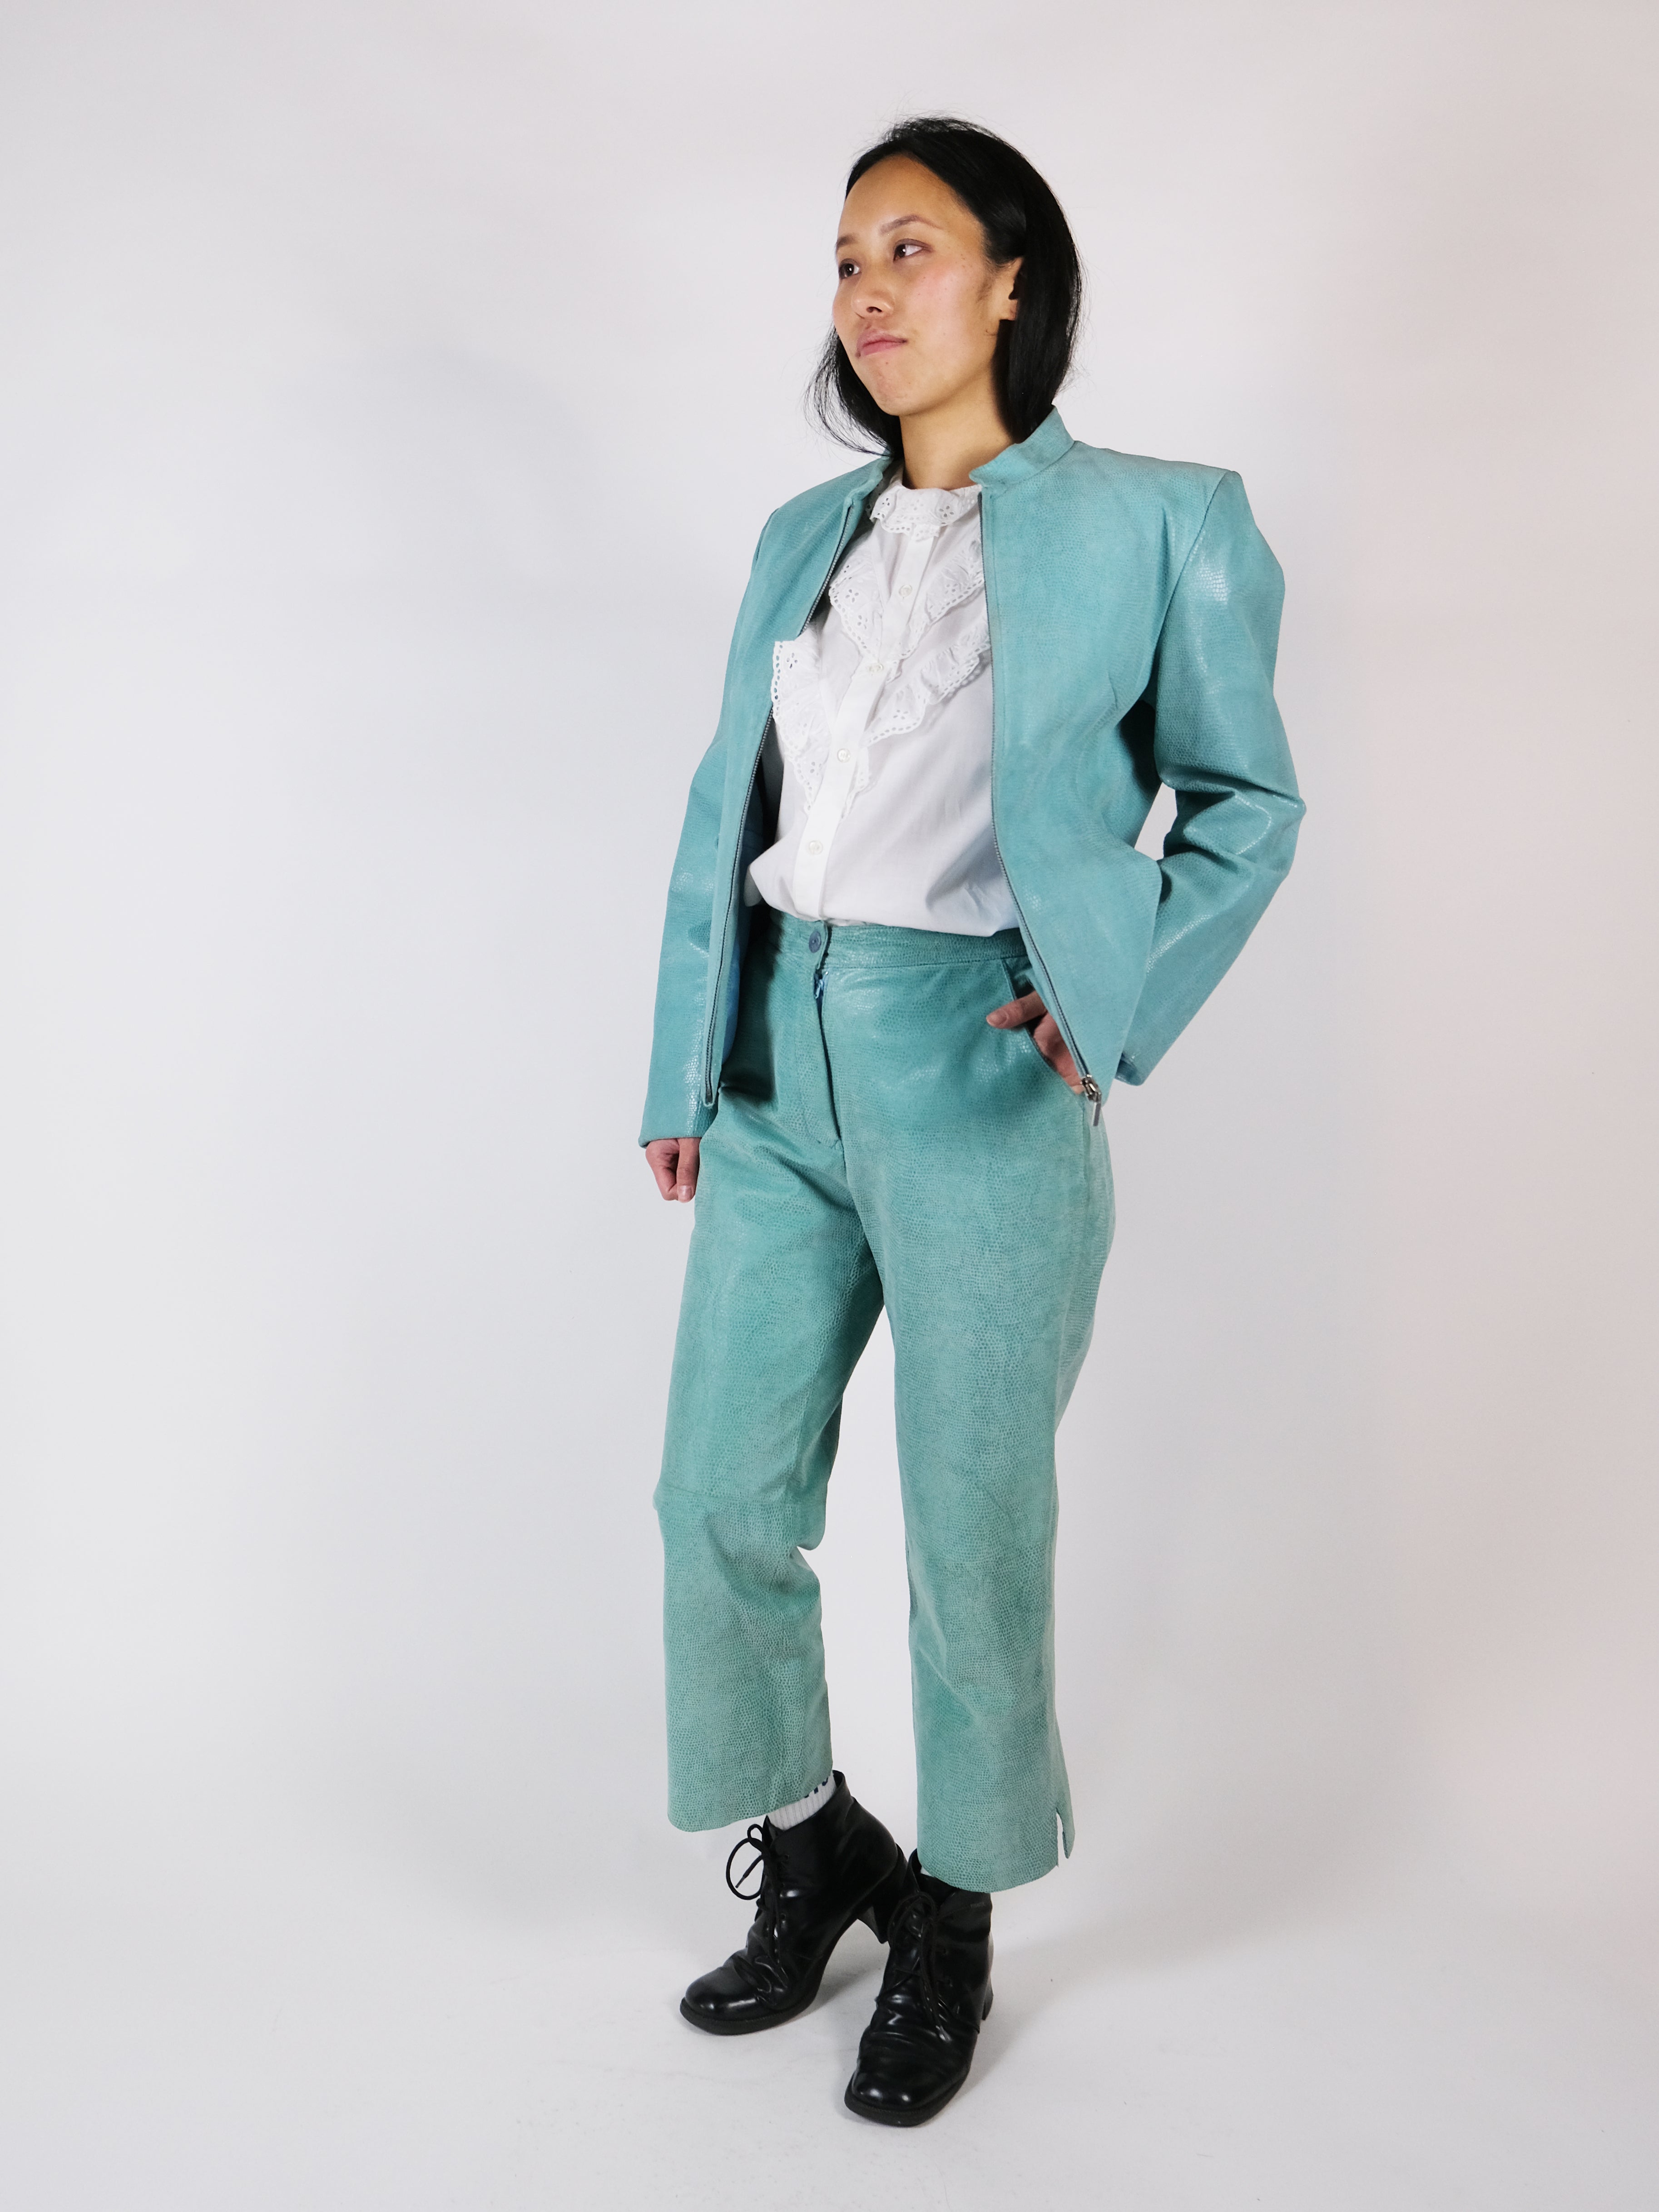 Turquoise leather suit